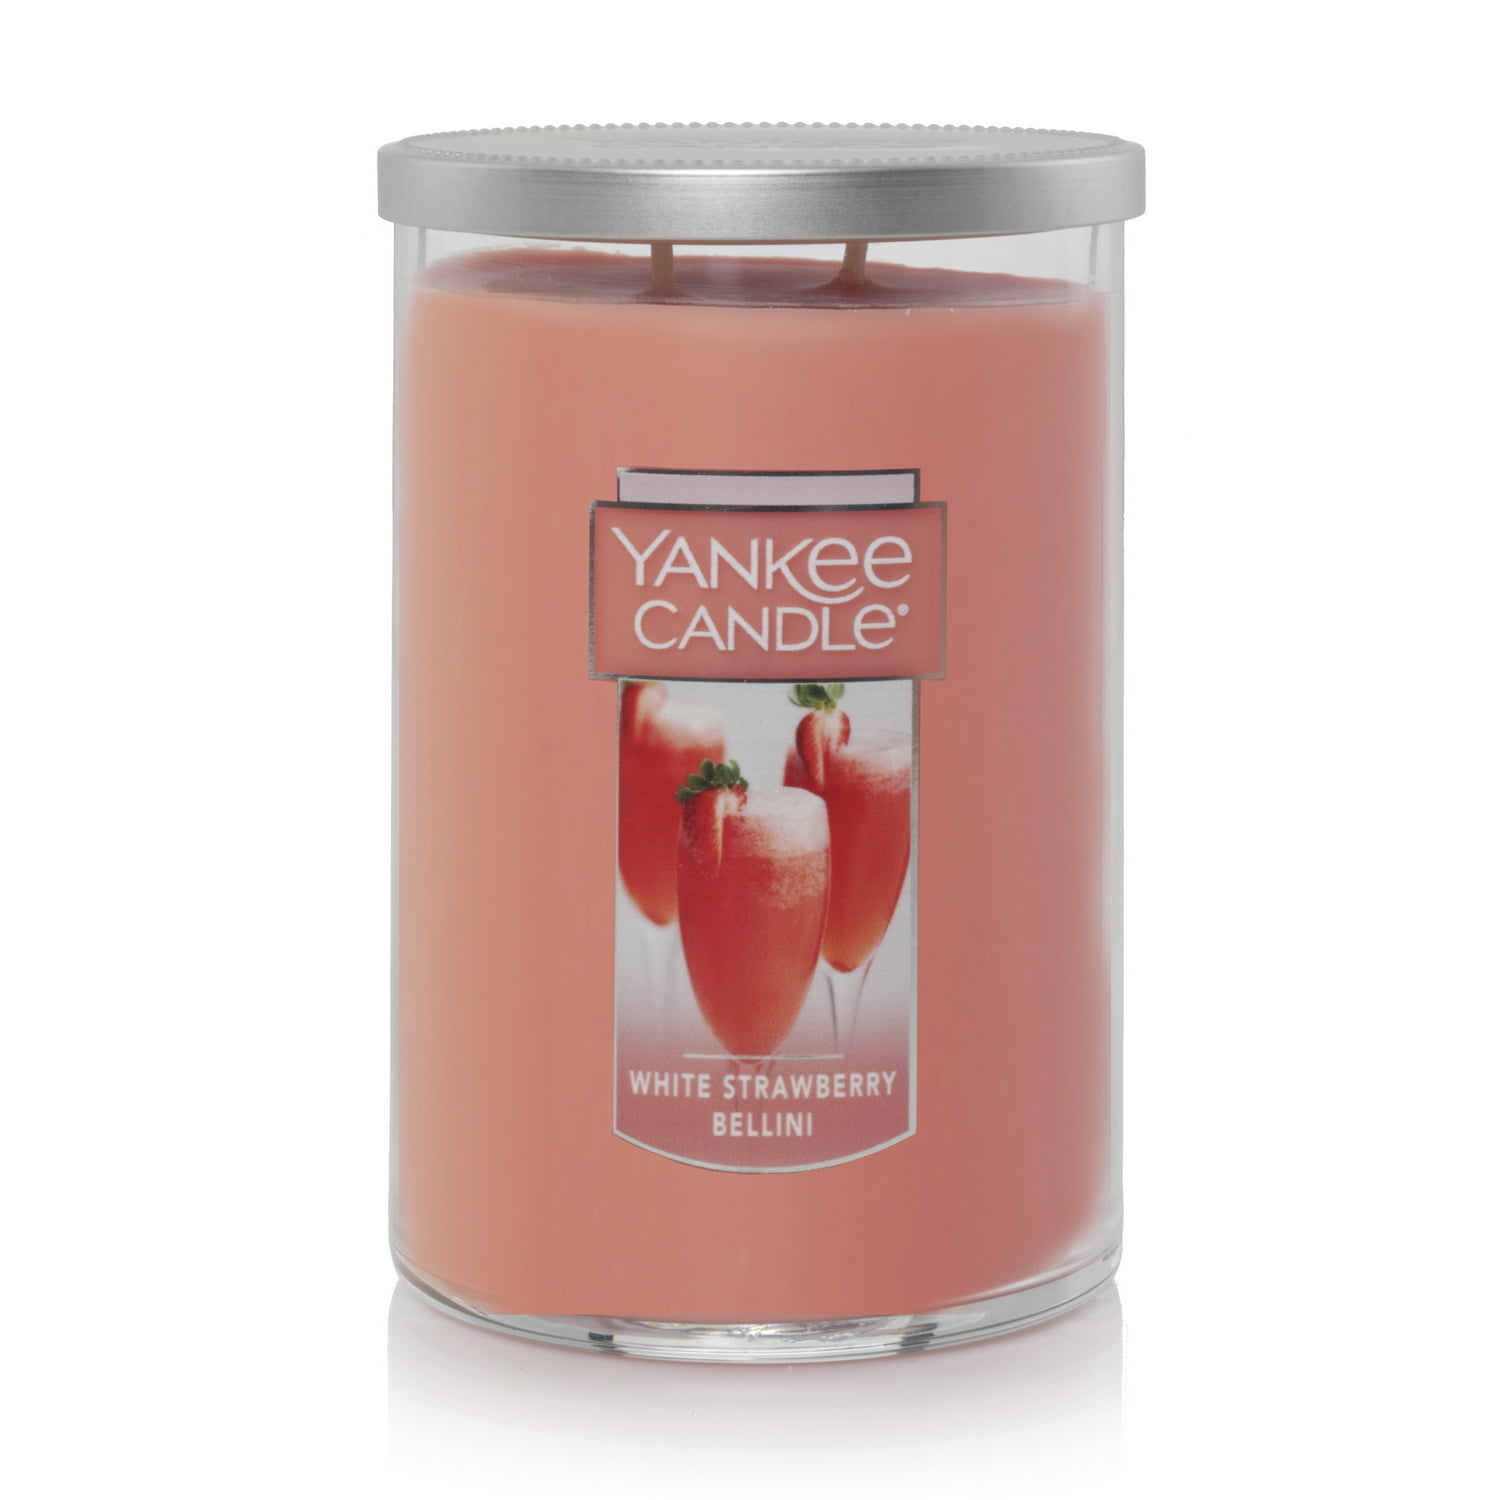 22-Oz Yankee Candle White Strawberry Bellini Large 2-Wick Tumbler Candle $11.51 + Free S&H w/ Walmart+ or $35+